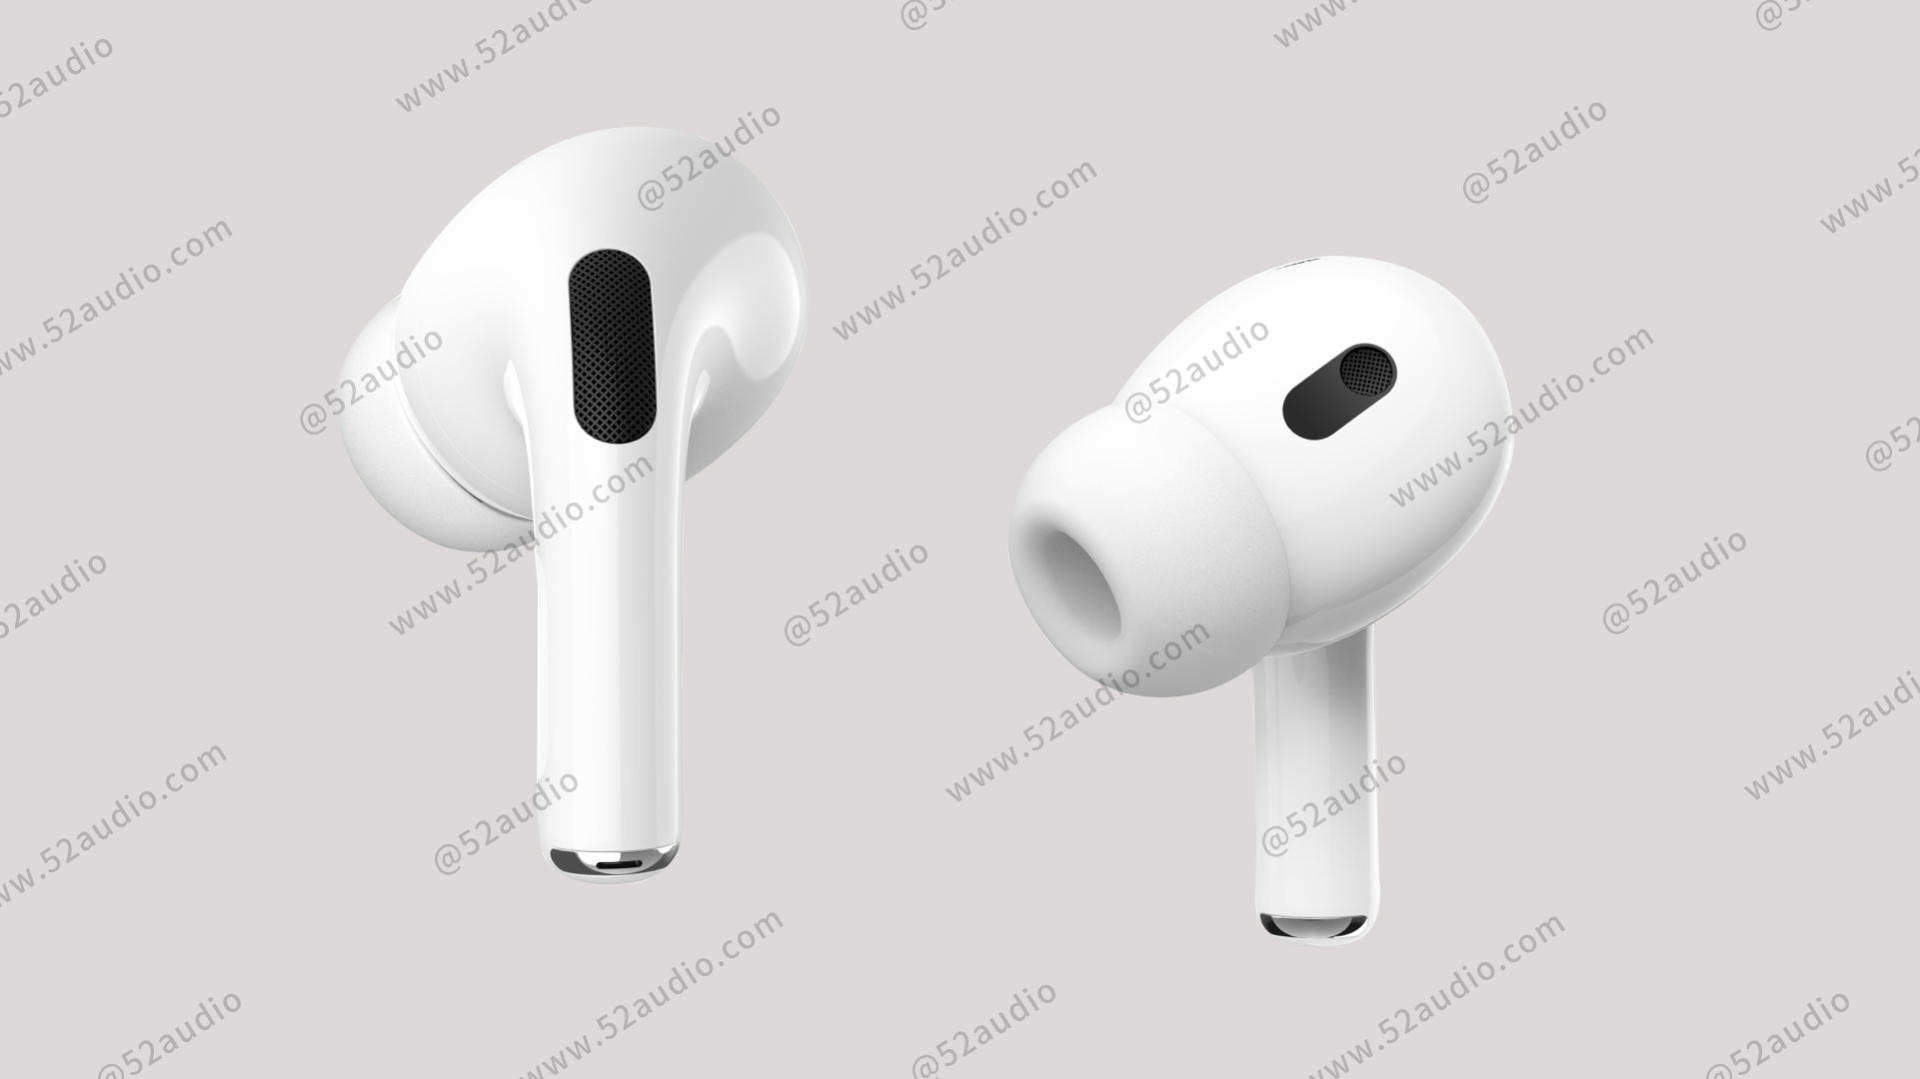 Image of the rumored Apple Airpods Pro 2